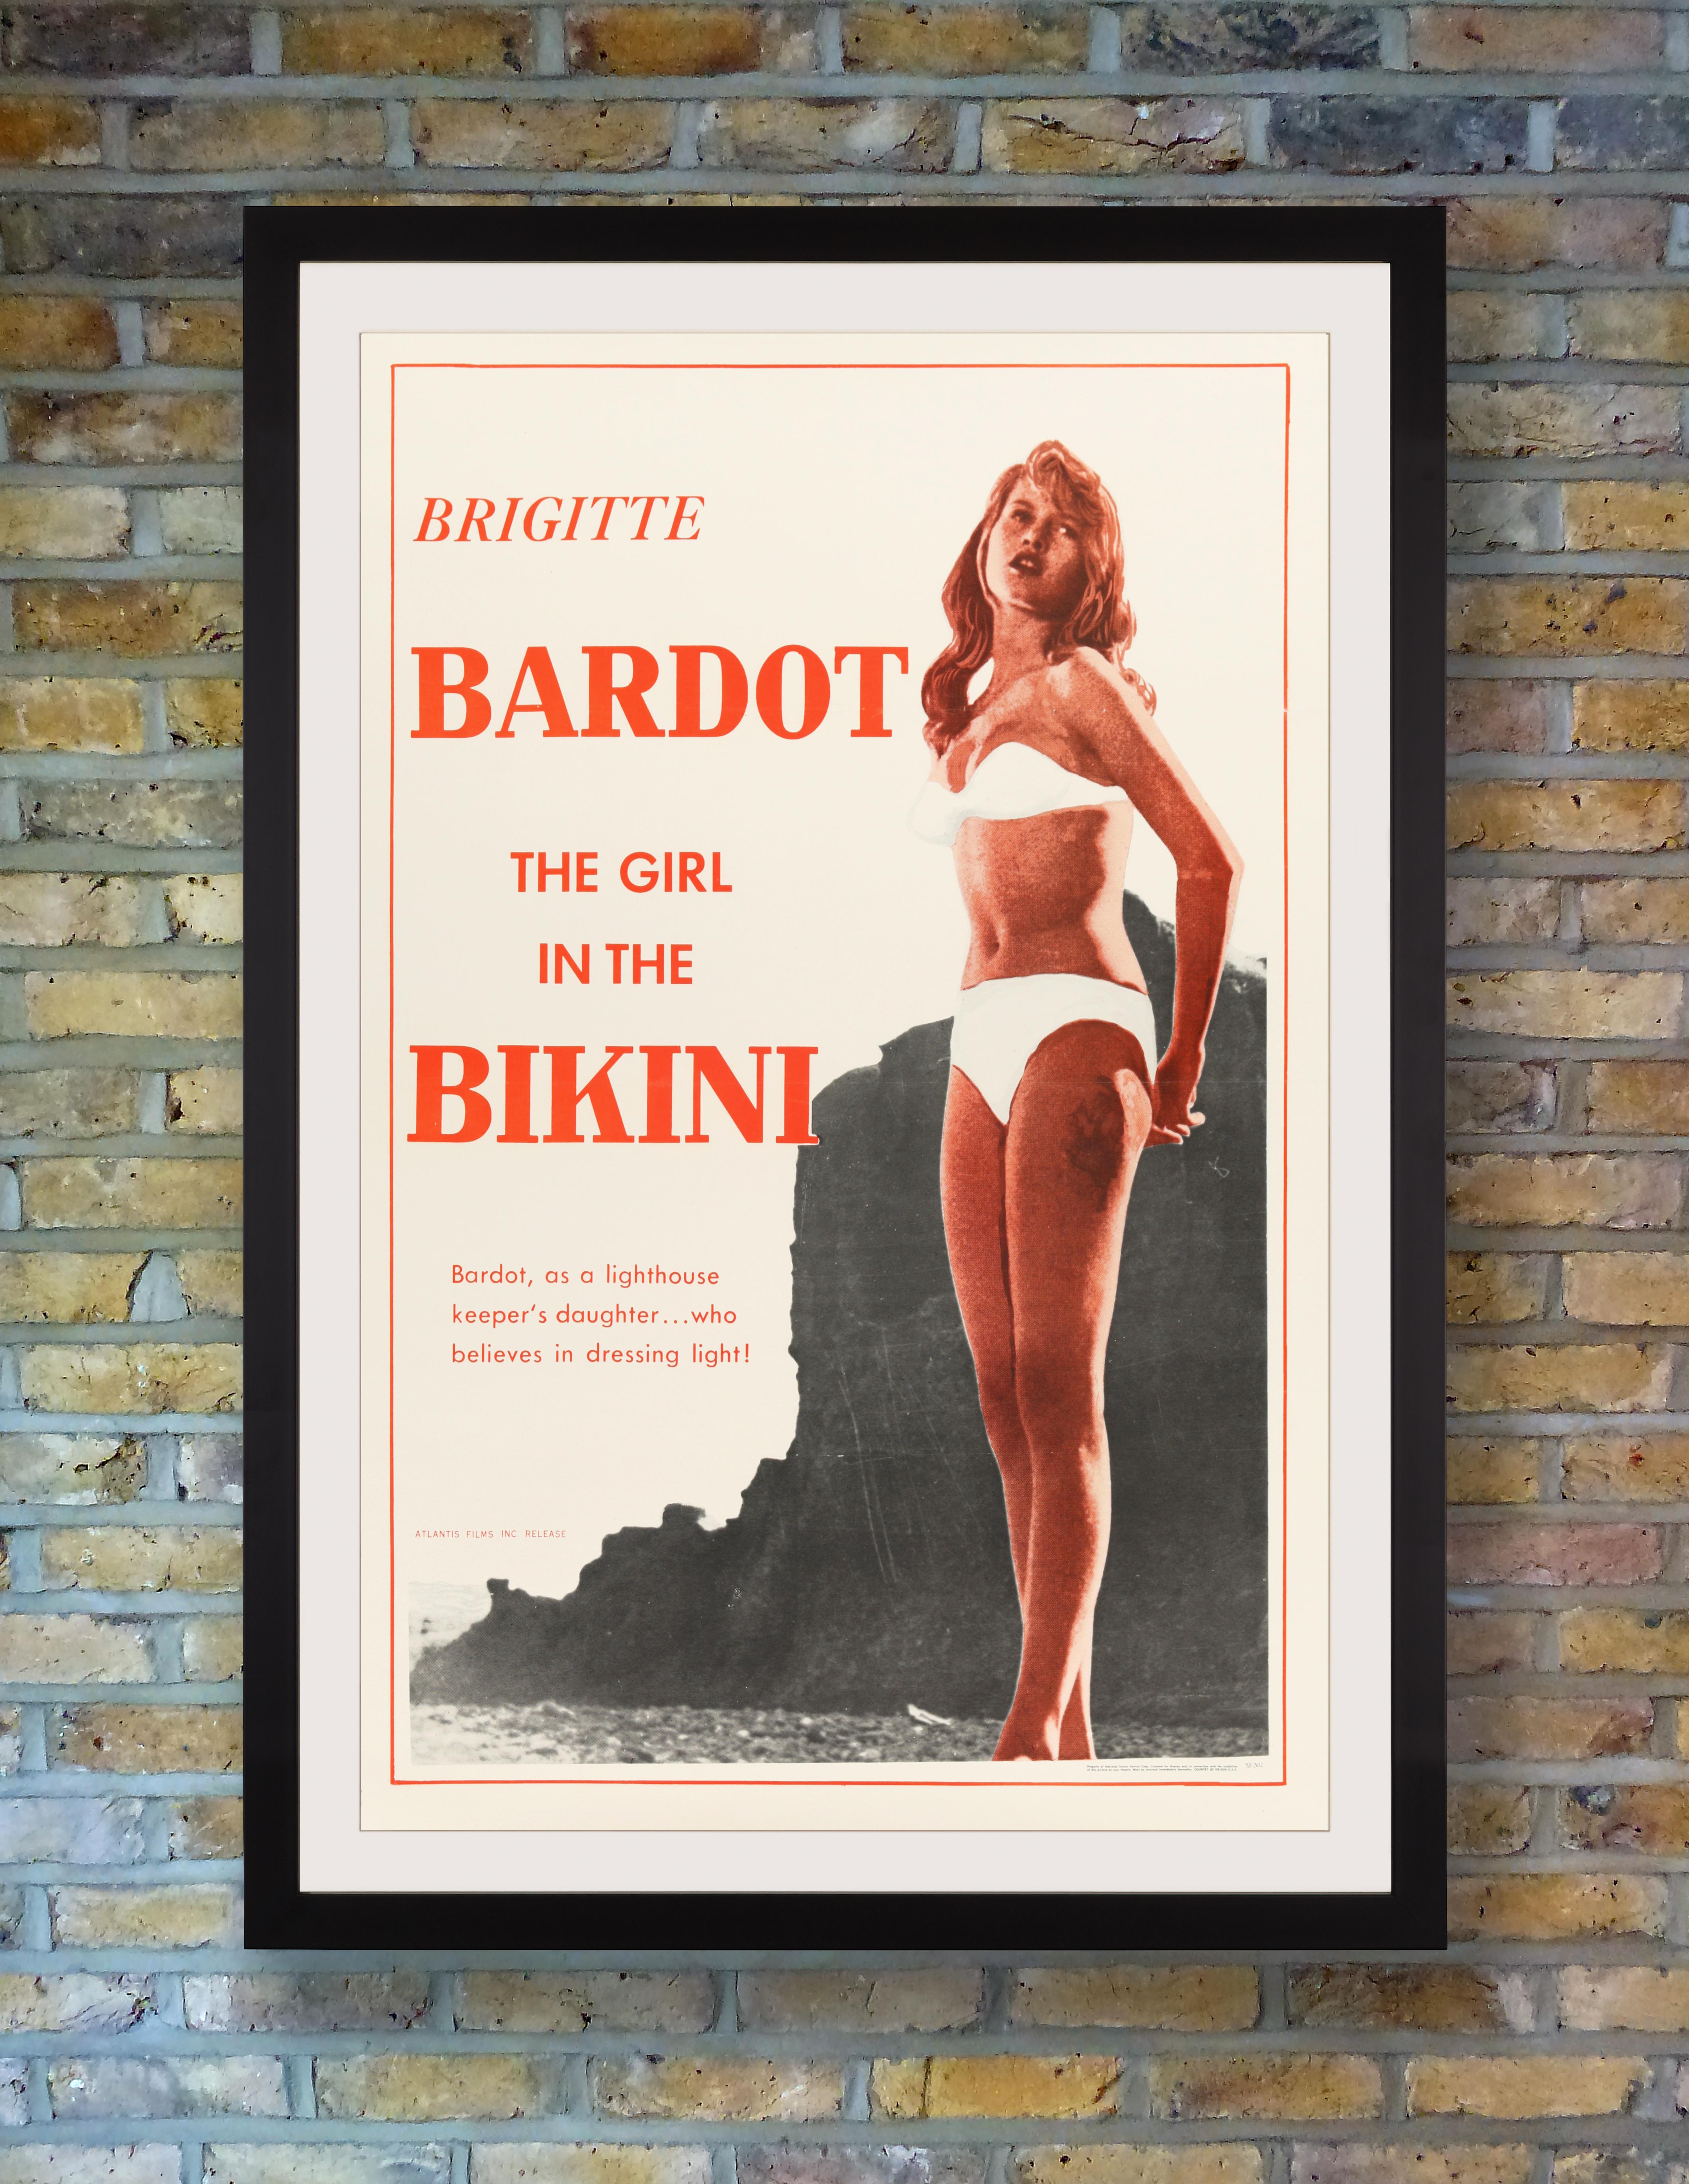 Utilising a posterised film still of a fresh-faced seventeen-year-old Brigitte Bardot frolicking on a rocky Corsican shore, this scarce US One Sheet for the 1958 American release of 'The Girl in the Bikini,' flaunted the stunning young starlet in